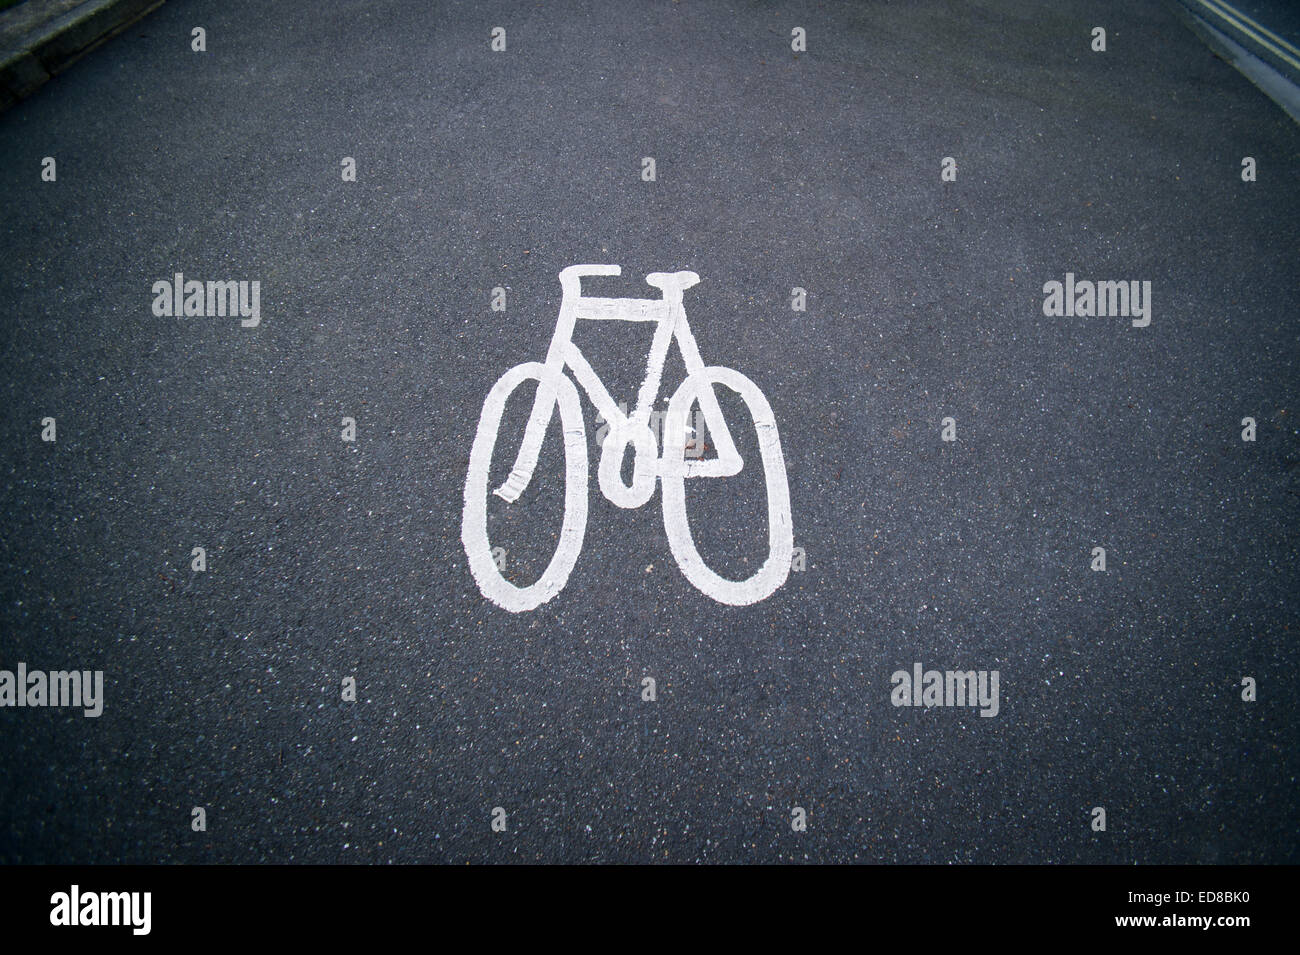 cycle lane symbol painted on a tarmac road Stock Photo